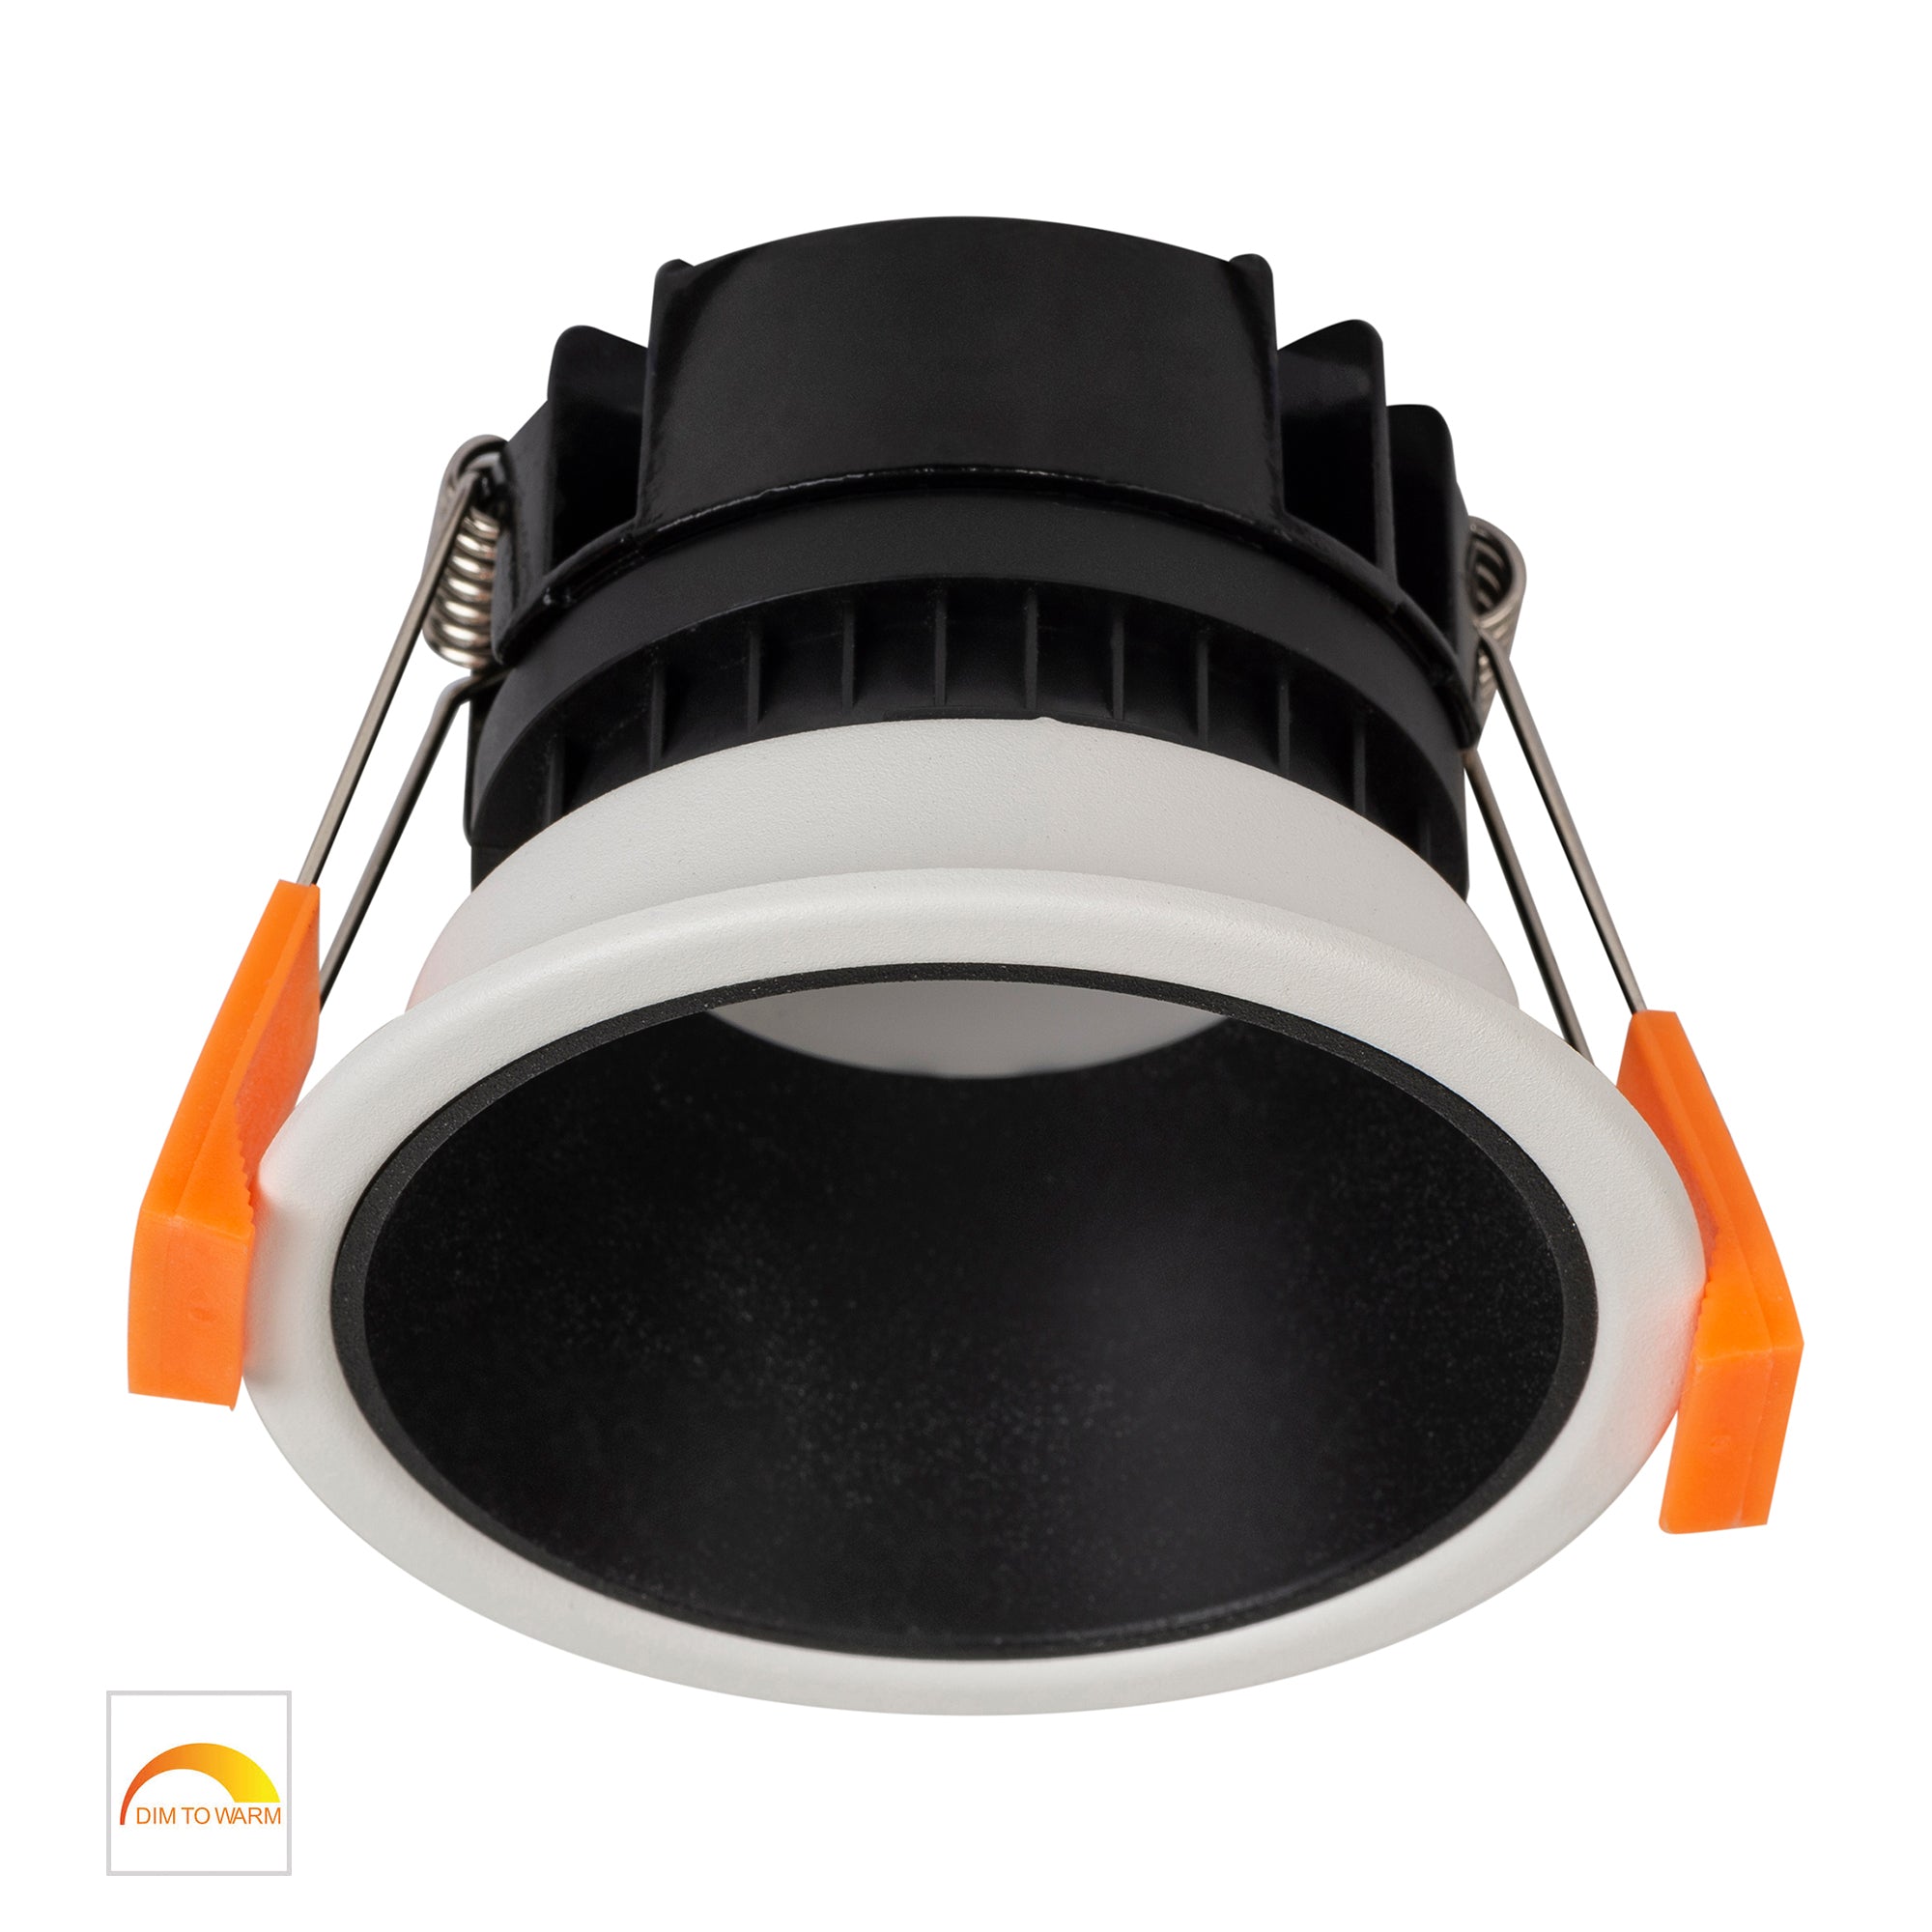 HV5529D2W-WB - Gleam White with Black Insert Fixed Dim to Warm LED Downlight